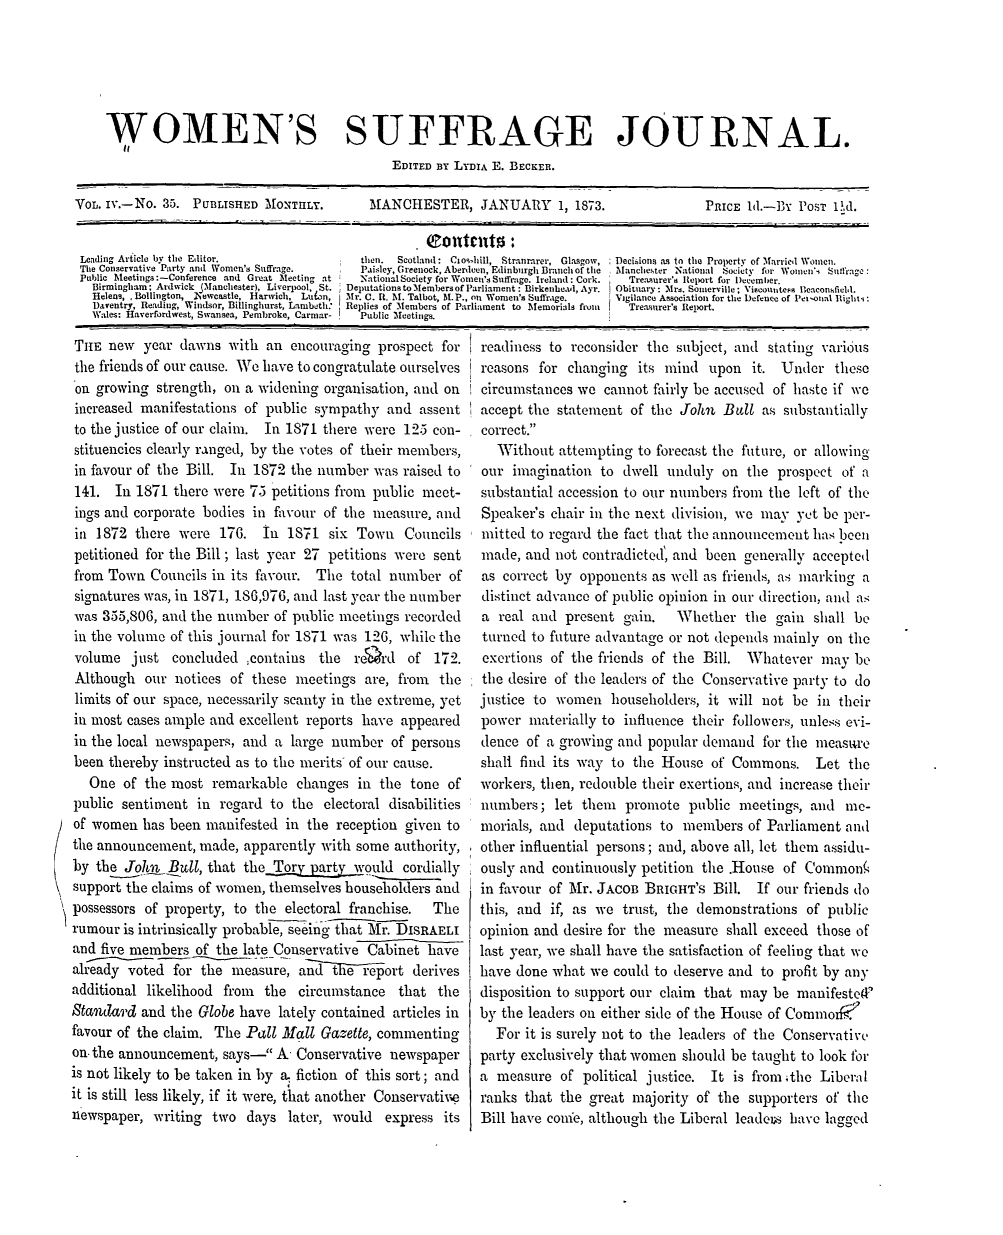 handle is hein.journals/wmsuffpr4 and id is 1 raw text is: 






    WOMEN'S SUFFRAGE JOURNAL.
                                              EDITED BY LYDIA E. BECKER.

VOL. iv.-No. 35. PUBLISHED MONTIILY.       MANCHESTER, JANUARY        1, 1873.             PRICE 1d.-BY  POST VA.


Lending Article by the Editor.           then. Scotland: Clos hill, Stranrarer, Glasgow, Decisions as to the Property of Married Women.
The Conservative Party and Women's Suffrage.           Paisley, Greenock,Aberdeen, Edinburgh Branchof the  Manchester National Society for Womnen'i Suffrage:
Public Meetings:-Conference and Great Meeting at       National Society for Women's Suffrage. Ireland: Cork.  Treasurer's Report for Decemlber.
  Birmingham: Ardwick (Manchester), Liverpool, St.  Deputations to Members of Parliament : Birkenhead, Ayr.  Obituary: Mrs. Somerville; Viscountess leaconsfield.
  Helens, Bollington, Newcastle, Harwich, Luian,    Mr. C. It. M. Talbot, M.P., on Women's Suffrage.     Vigilance Association for the Defence of Petnoial Rlight4:
  Daventry, Reading, Windsor, Billinghurst, Lambeth:  Replies of Members of Parliament to Memorials froin   Treasurer's Report.
  Wales: Haverfordwest, Swansea, Pembroke, Carmar-     Public Meetings.


THE  new  year  dawns  with an  encouraging prospect for
the friends of our cause. We have to congratulate ourselves
on  growing strength, on a widening  organisation, and on
increased manifestations of public sympathy   and assent
to the justice of our claim. In 1871 there were 125 con-
stituencies clearly ranged, by the votes of their members,
in favour of the Bill. In 1872  the number  was raised to
141.  In 1871  there were 75 petitions from public meet-
ings and corporate bodies in favour of the  measure, and
in  1872 there  were 176.   In 1871  six Town   Councils
petitioned for the Bill; last year 27 petitions were sent
from Town  Councils in its favour. The  total number   of
signatures was, in 1871, 186,976, and last year the number
was 355,806, and the number  of public meetings recorded
in the volume of this journal for 1871 was 126, while the
volume   just  concluded ;contains  the  reQrd   of 172.
Although   our notices of these meetings  are, from  the
limits of our space, necessarily scanty in the extreme, yet
in most cases ample and excellent reports have  appeared
in the local newspapers, and a  large number  of persons
been thereby instructed as to the merits of our cause.
   One  of the most remarkable   changes in  the tone of
public sentiment  in regard  to the electoral disabilities
of women  has been manifested  in the reception given to
the announcement,  made, apparently with some  authority,
by  the Jok7. Bull, that the              puld  cordially
support the claims of women, themselves householders and
possessors of property, to the electoral franchise. The
rumour  is intrinsically probable, seeing that Mr.DISRAELI
and five members  of the late Conservative Cabinet have
already voted  for the measure,  and  t iereport derives
additional likelihood from  the  circumstance  that  the
Standard  and the Globe have  lately contained articles in
favour of the claim. The Pall Mall  Gazette, commenting
on. the announcement, says-  A  Conservative newspaper
is not likely to be taken in by a. fiction of this sort; and
it is still less likely, if it were, that another Conservative
newspaper,  writing two  days  later, would  express  its


readiness to reconsider the subject, and  stating various
reasons  for changing  its mind  upon  it.  Under  these
circumstances we  cannot fairly be accused of haste if we
accept the statement  of the John  Bull  as substantially
correct.
   Without attempting  to forecast the future, or allowing
our  imagination to  dwell unduly  on  the prospect of a
substantial accession to our numbers from the left of the
Speaker's chair in the next division, we may  yet be per-
mitted to regard the fact that the announcement has been
made,  and not contradicted', and been generally accepted
as correct by opponents  as well as friends, as marking a
distinct advance of public opinion in our direction, and as
a  real and present  gain.  Whether   the  gain shall be
turned to future advantage or not depends mainly  on the
exertions of the friends of the Bill.  Whatever  may  be
the desire of the leaders of the Conservative party to do
justice to women   householders, it will not be  in their
power  materially to influence their followers, unless evi-
dence  of a growing and popular demand   for the measure
shall find its way to the House  of Commons. Let the
workers, then, redouble their exertions, and increase their
numbers;   let then  promote  public meetings,  and  me-
morials, and  deputations to members   of Parliament and
other influential persons; and, above all, let them assidu-
ously and continuously petition the .House  of Common(
in favour of Mr. JACOB  BRIGHT's  Bill. If our friends do
this, and if, as we  trust, the demonstrations of public
opinion and desire for the measure  shall exceed those of
last year, we shall have the satisfaction of feeling that we
have done what  we could to deserve and  to profit by any
disposition to support our claim that may be  manifested
by the leaders on either side of the House of Comnmoxk2
  For  it is surely not to the leaders of the Conservative
party exclusively that women should be taught to look for
a measure   of political justice. It is from 4the Liberal
ranks that  the great majority of the  supporters of the
Bill have come, although the Liberal leadeus have lagged


